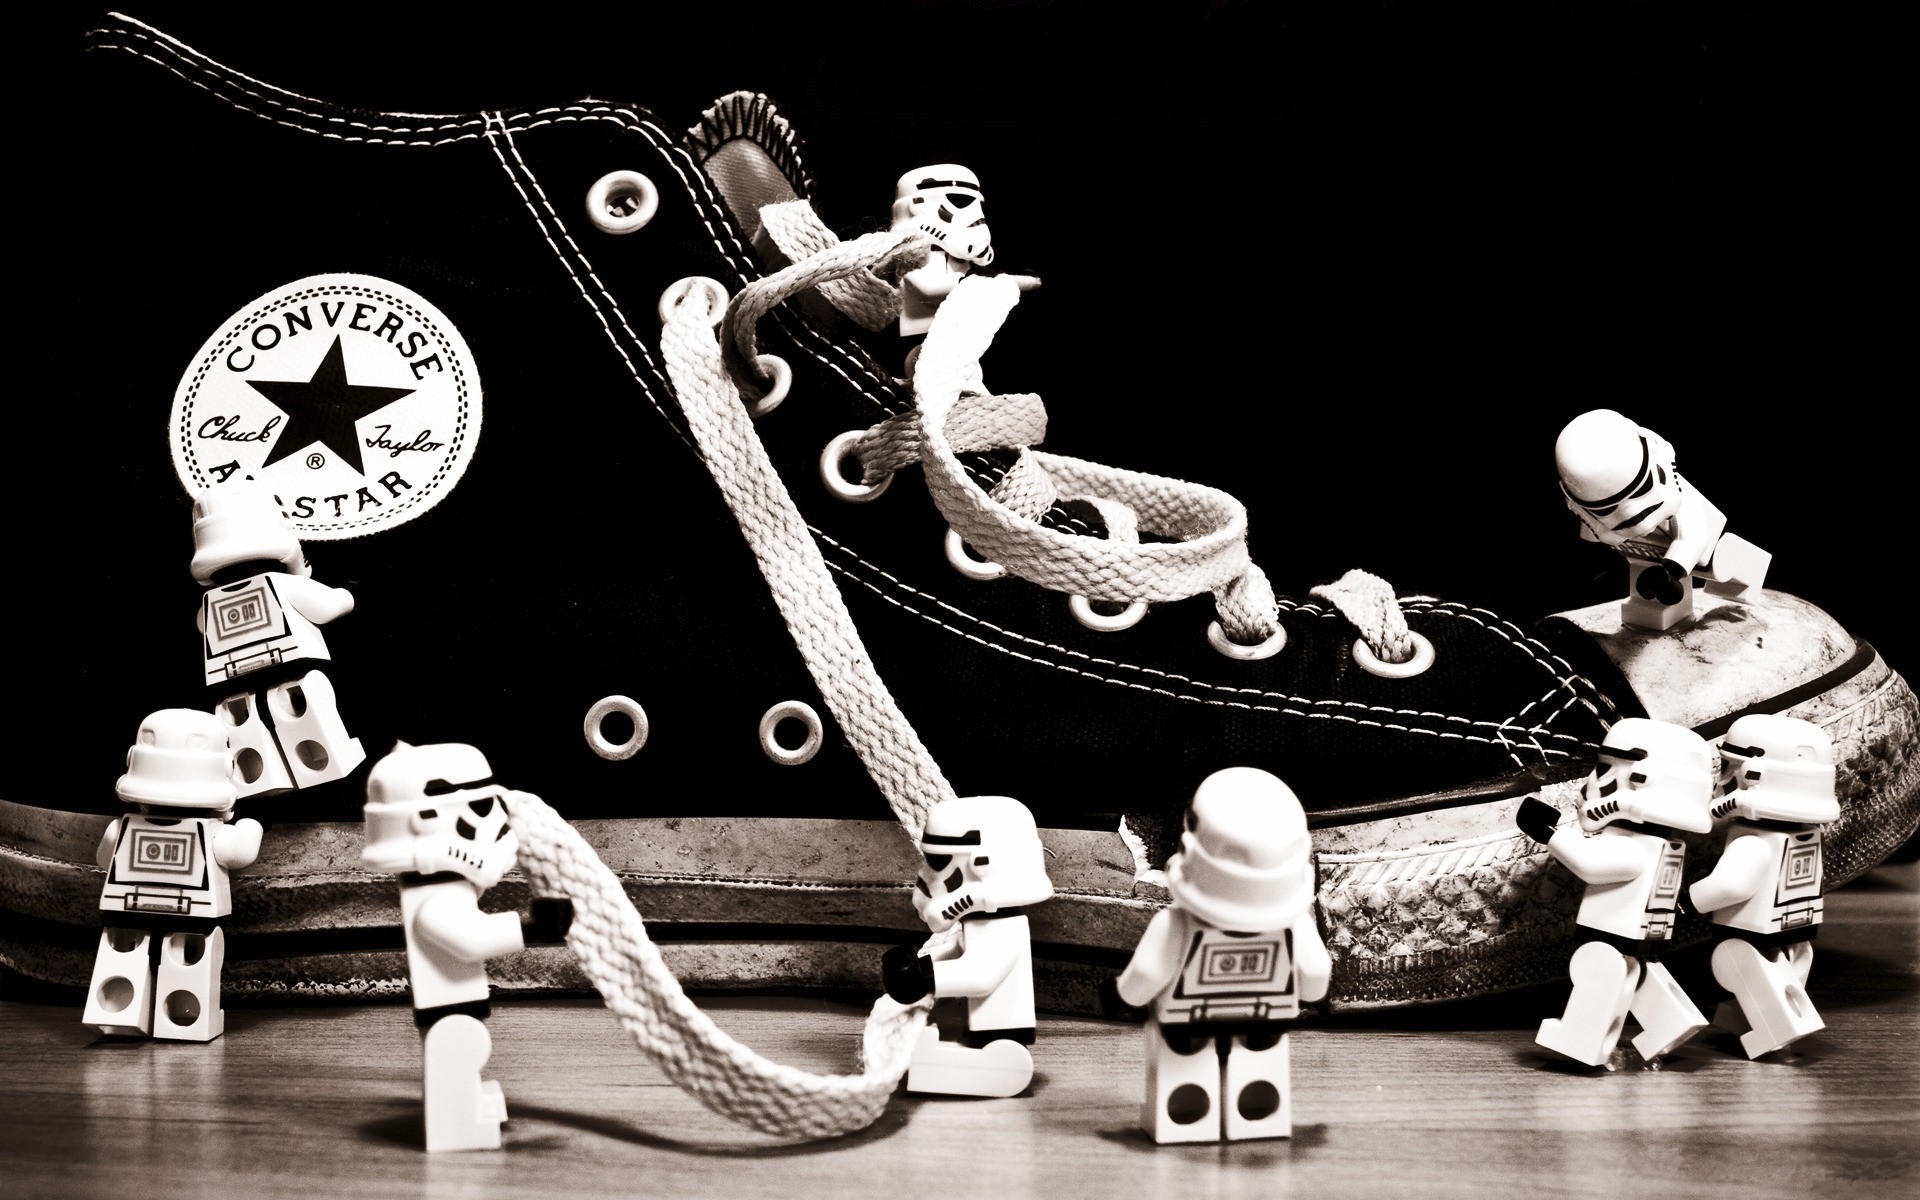 Lego Stormtroopers Wallpaper 1920x1200 Lego Stormtroopers Shoes